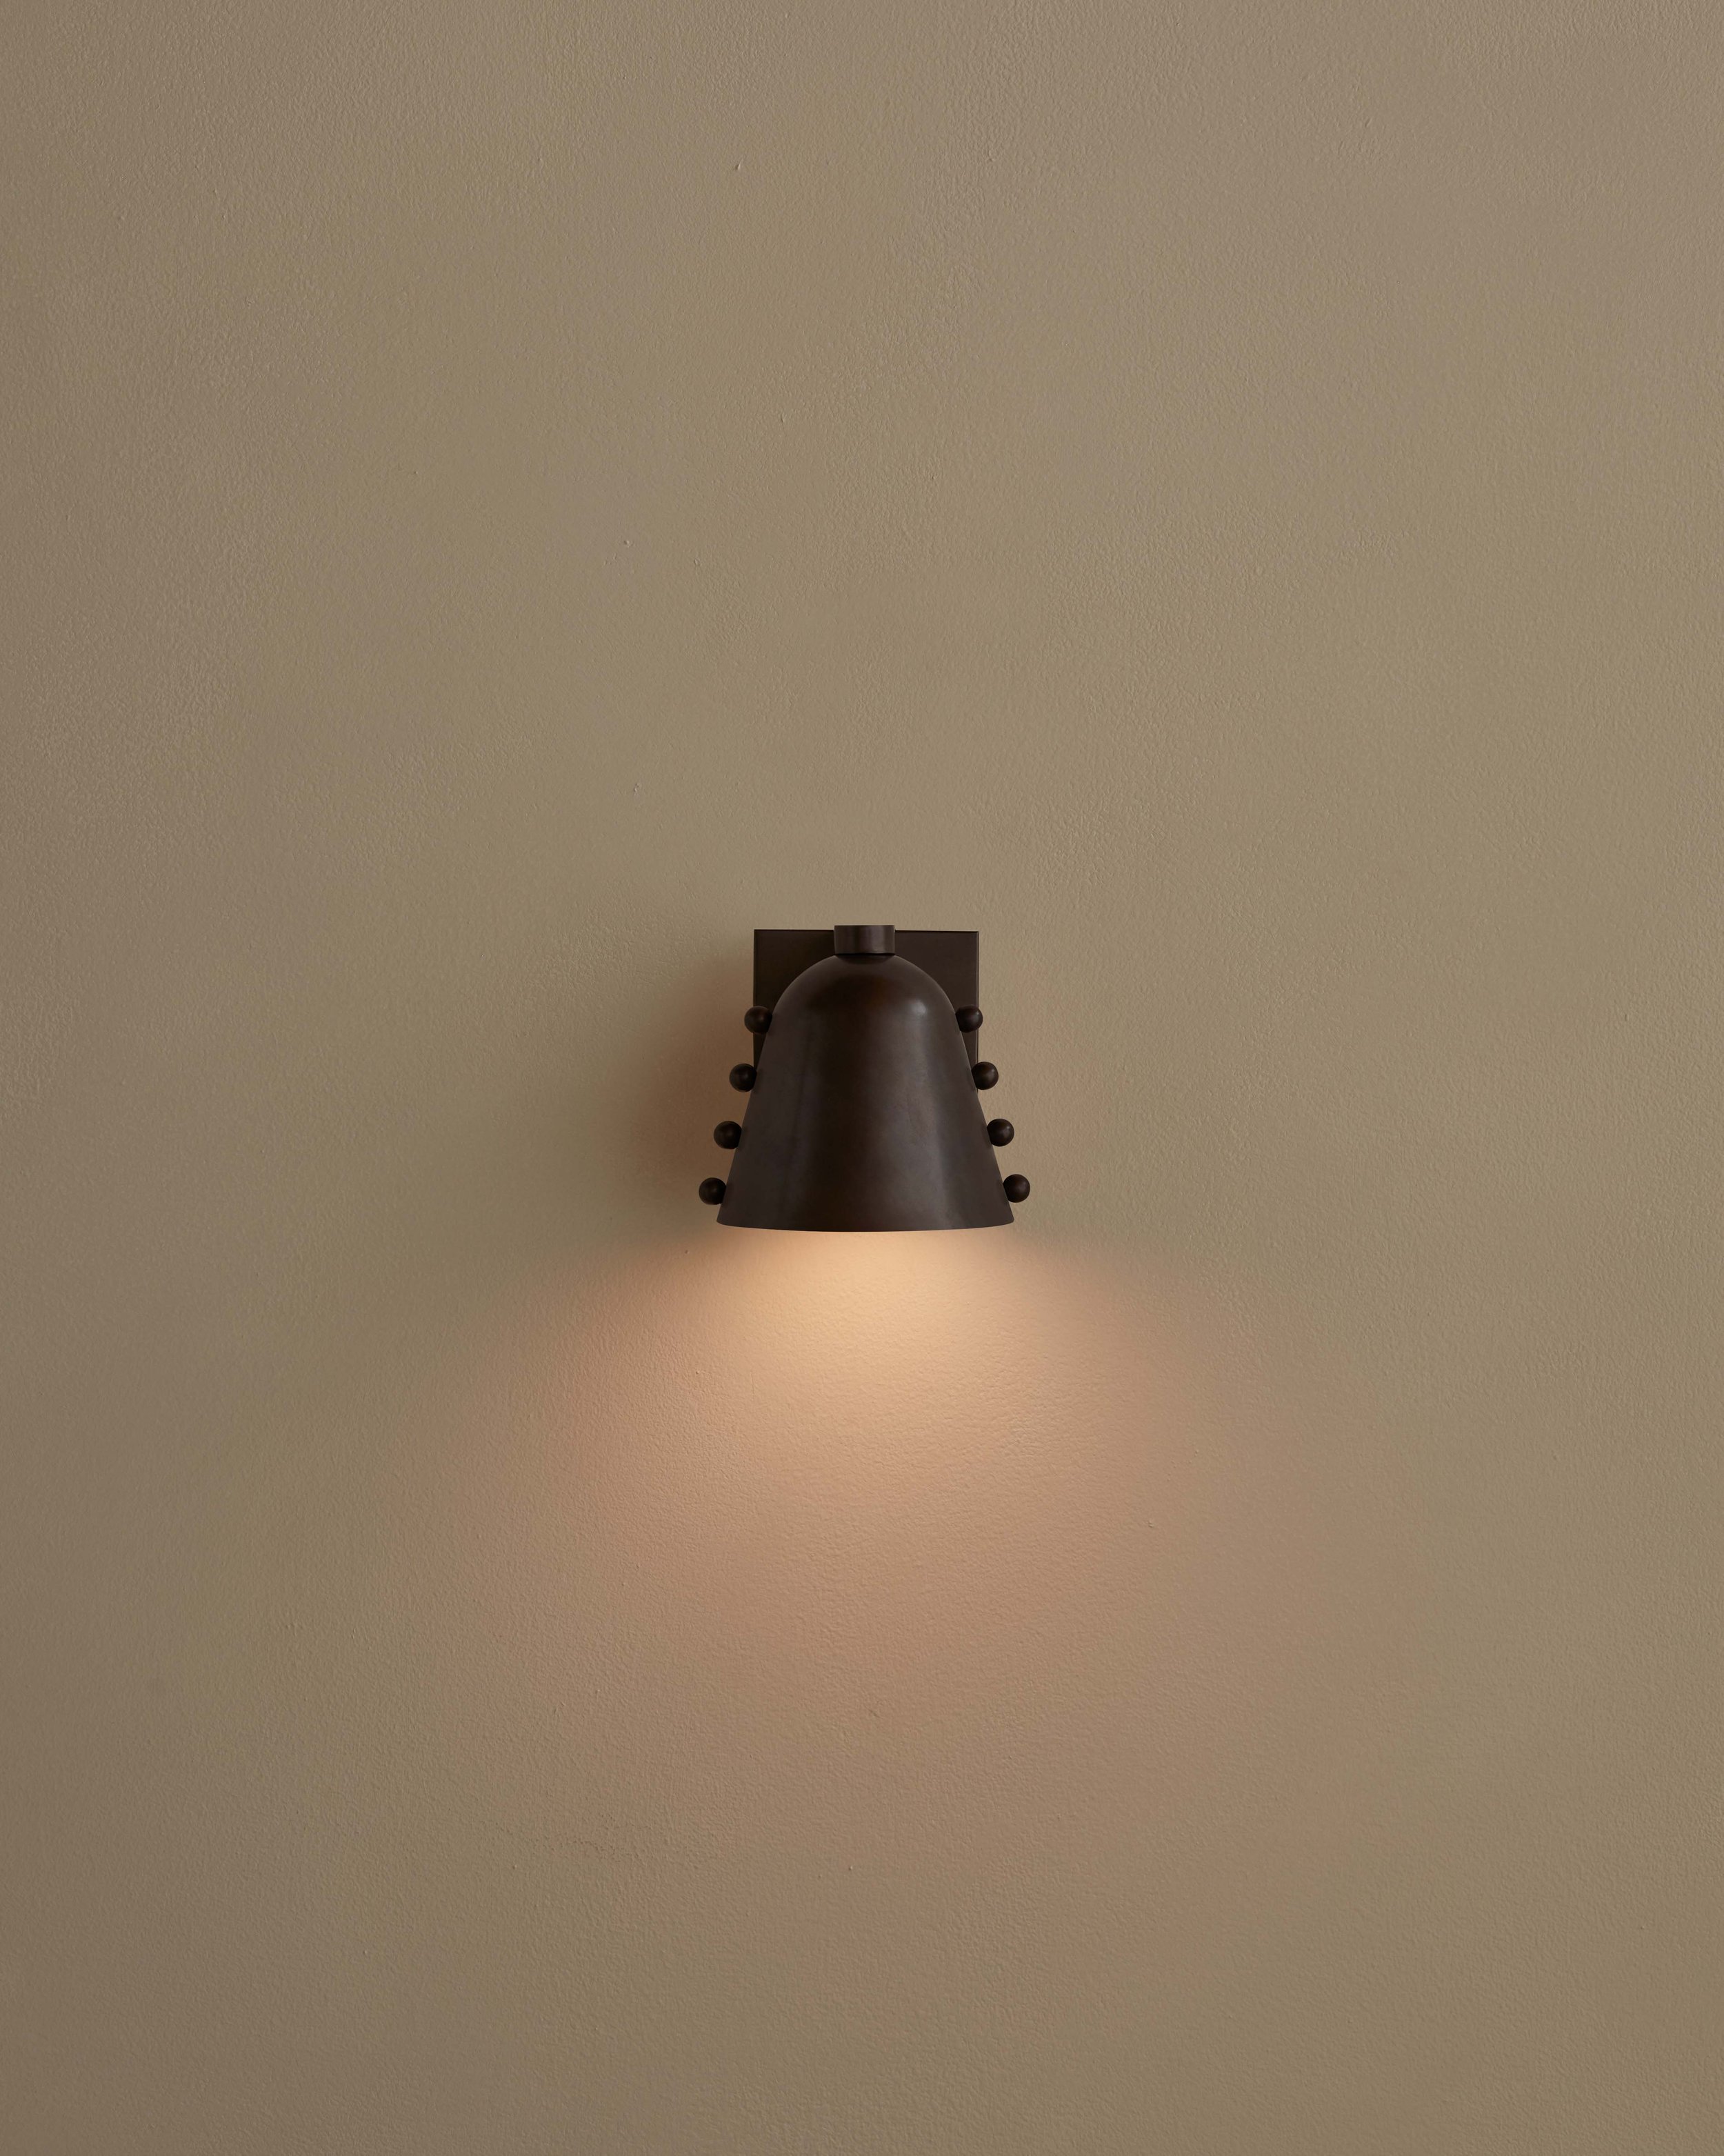 INCOMMONWITH_SCONCE_CALLA_WALL_SCONCE_FACING_DOWN_BLACKENED_BRASS_BLACKENED_BRASS_DOTS_ON.jpg